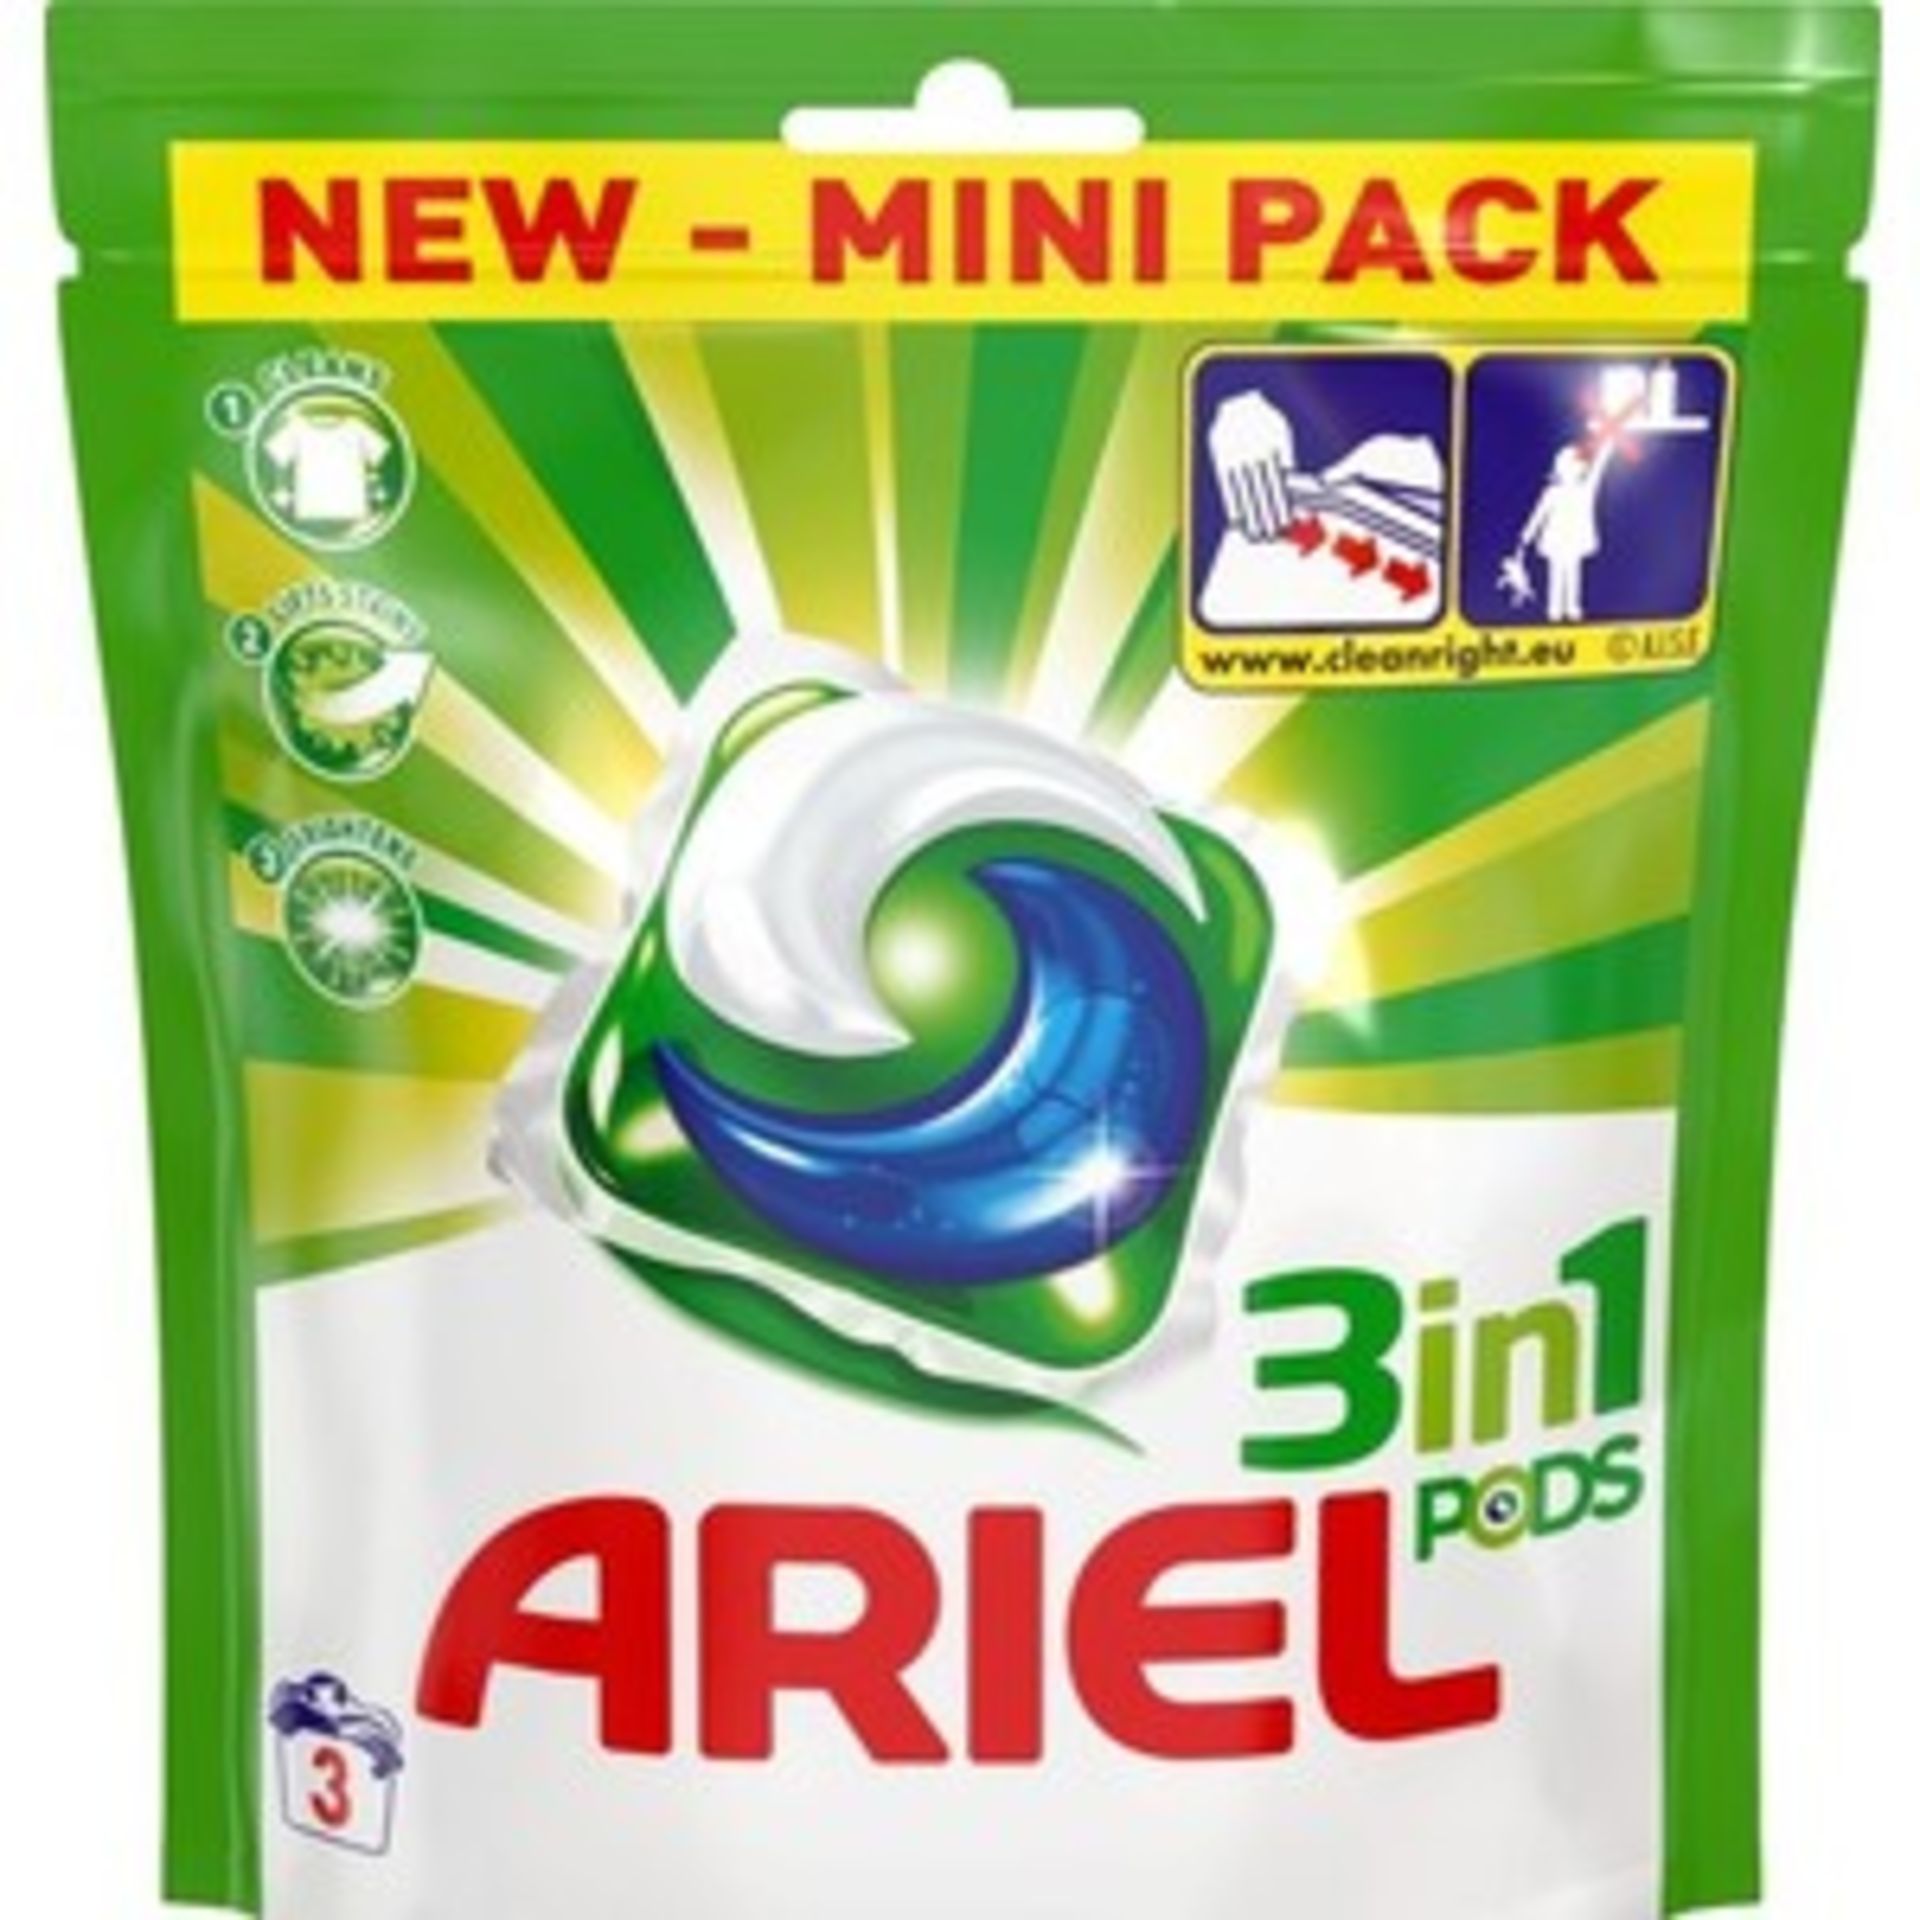 V Brand New 12 Ariel 3-in-1 Pods Laundry Detergent X 2 YOUR BID PRICE TO BE MULTIPLIED BY TWO